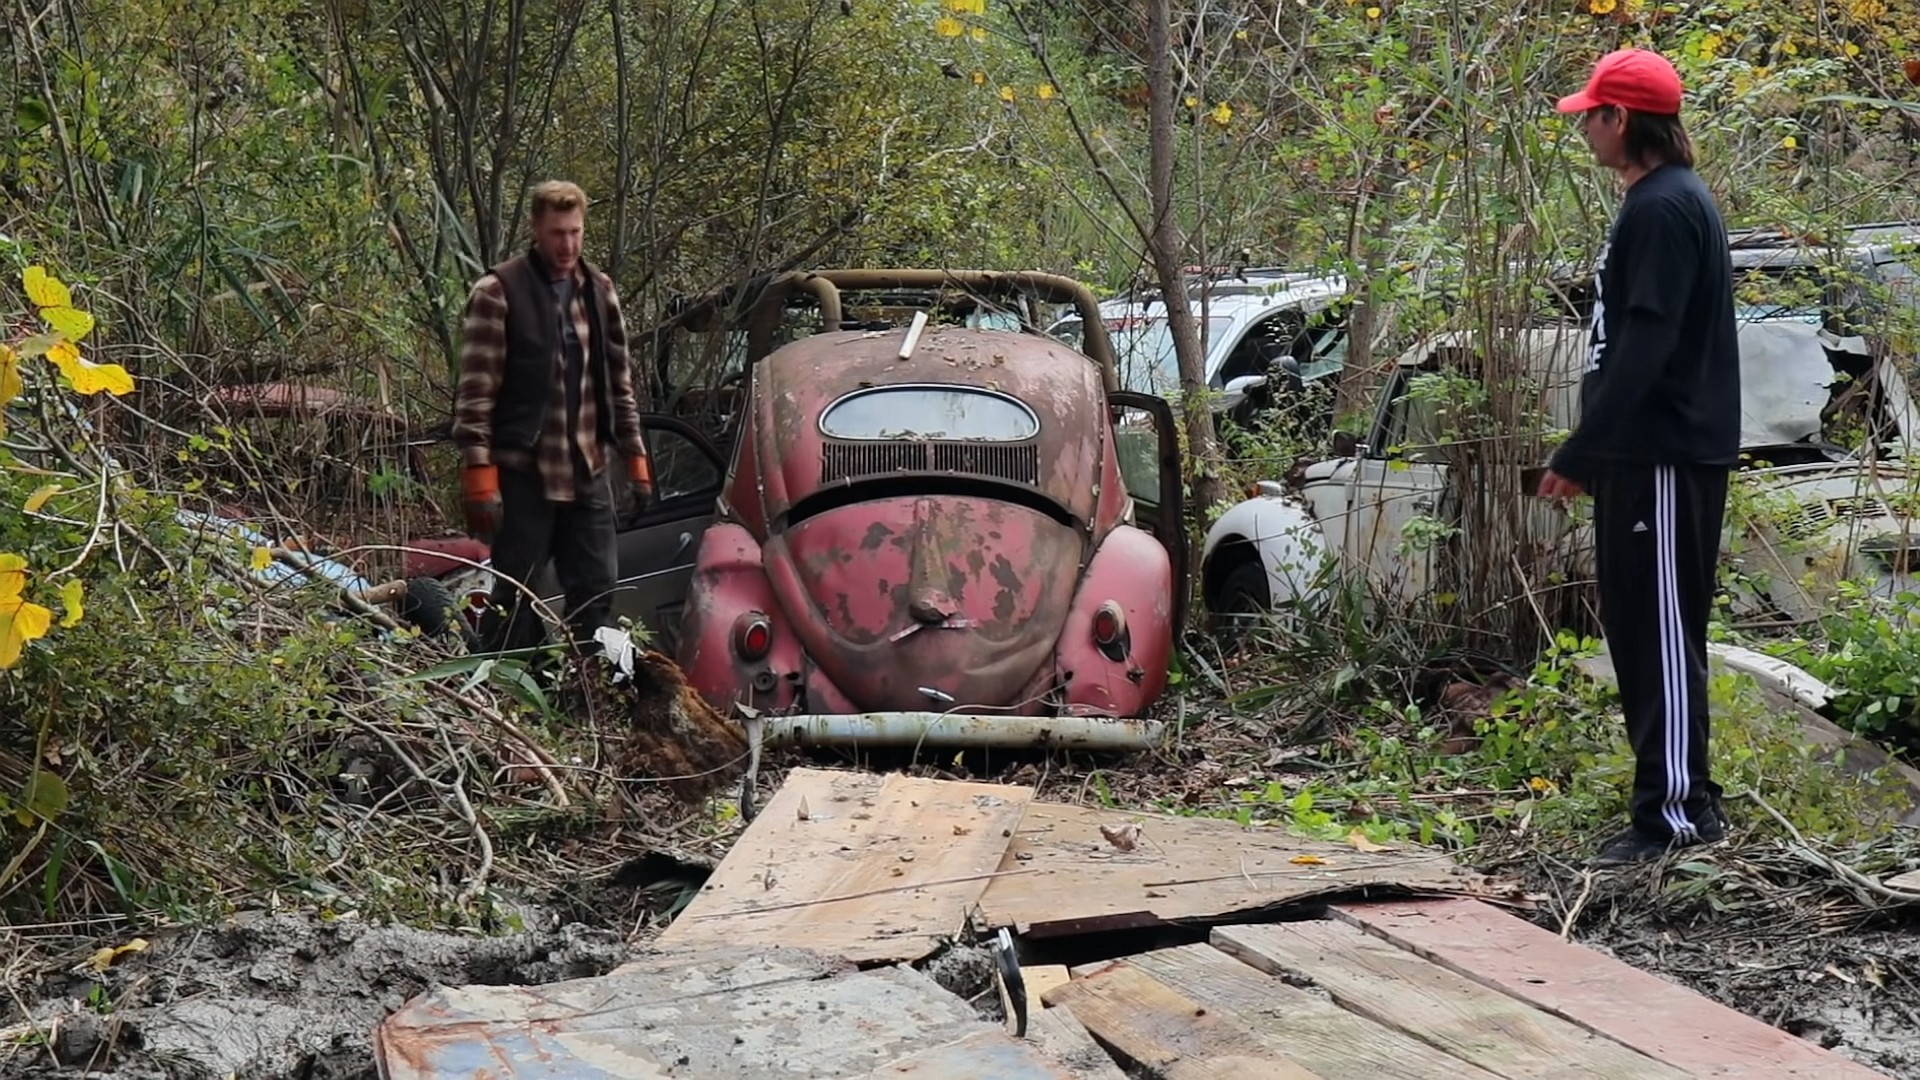 rare vw beetle spent 52 years in a junkyard gets rescued for full restoration 2